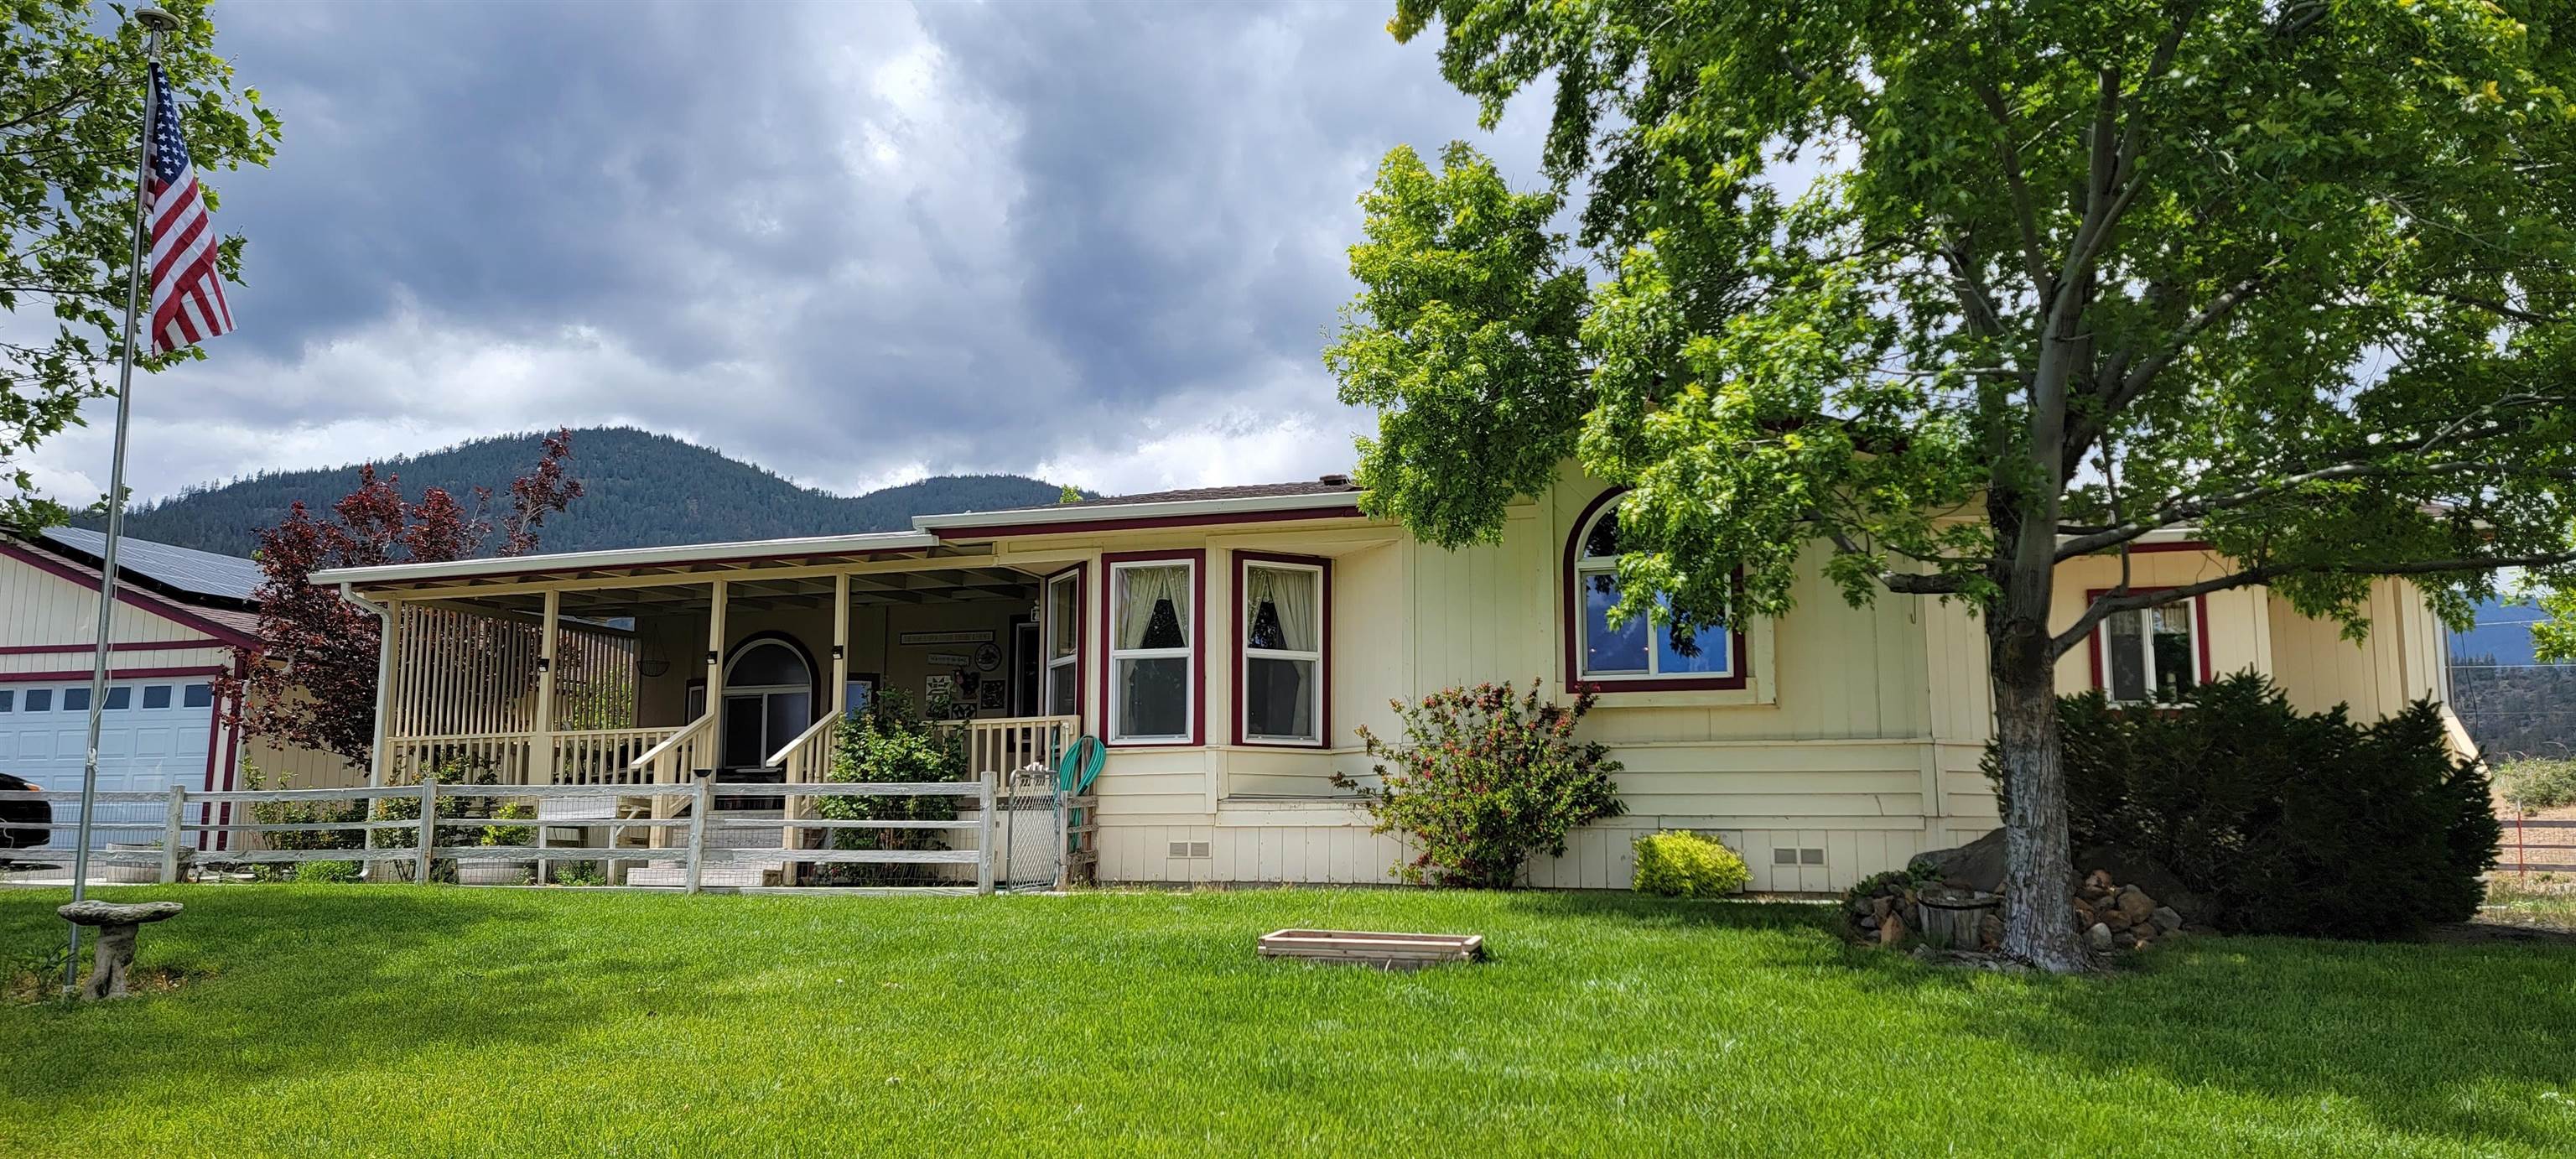 Looking for some space with a view? LOOK no farther!!! This very well kept Silvercrest home has 3 bedrooms 2 baths and a 800sqft garage. Beautiful views of majestic Mt. Shasta from the covered porch. These views don't come along often. Make offers.